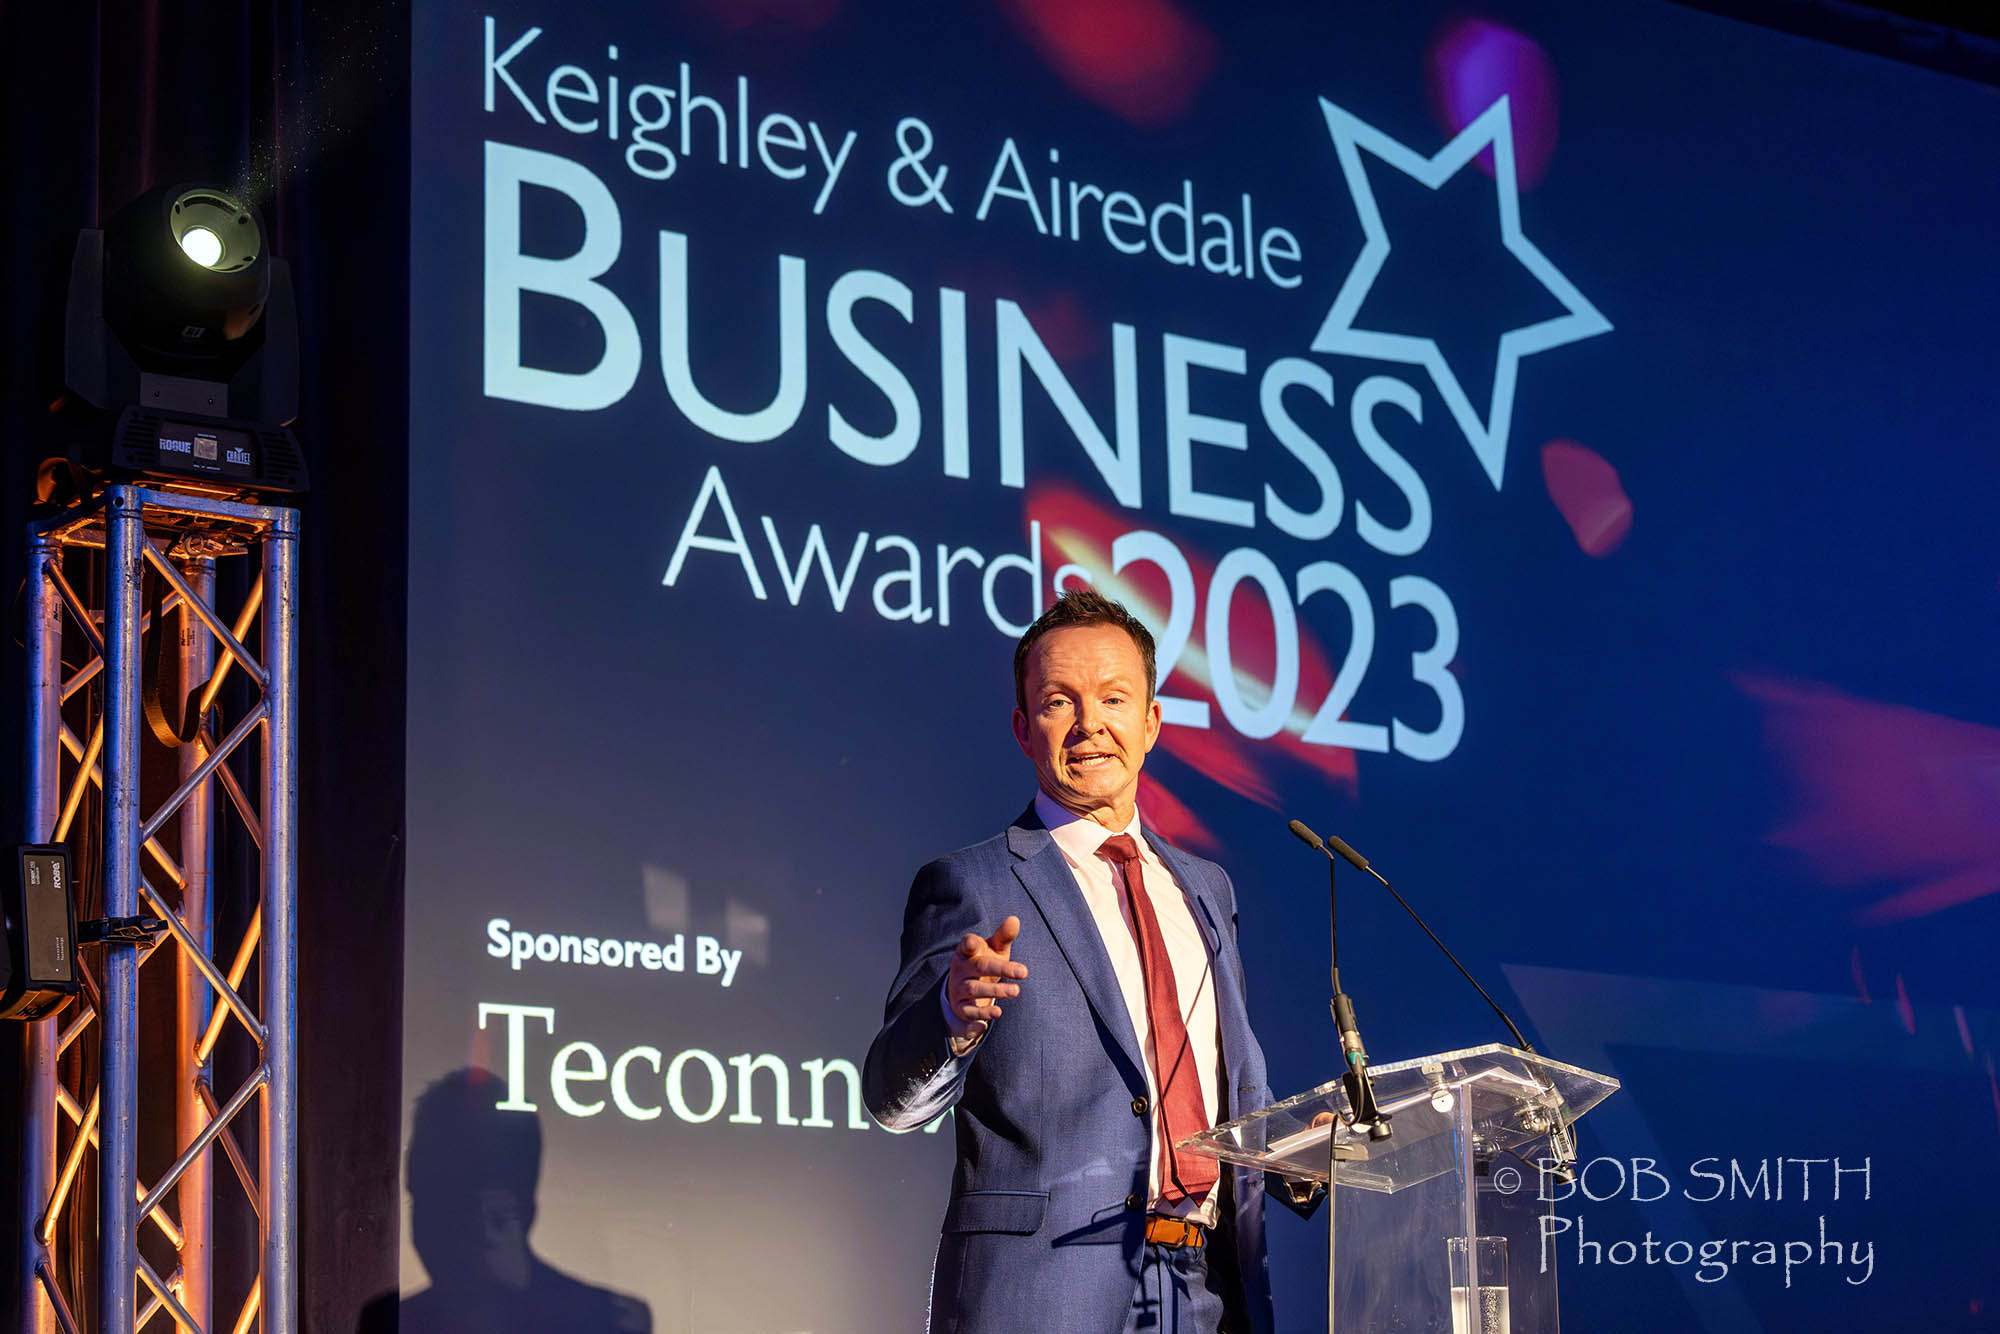 Paul Hudson at Keighley and Airedale Business Awards 2023